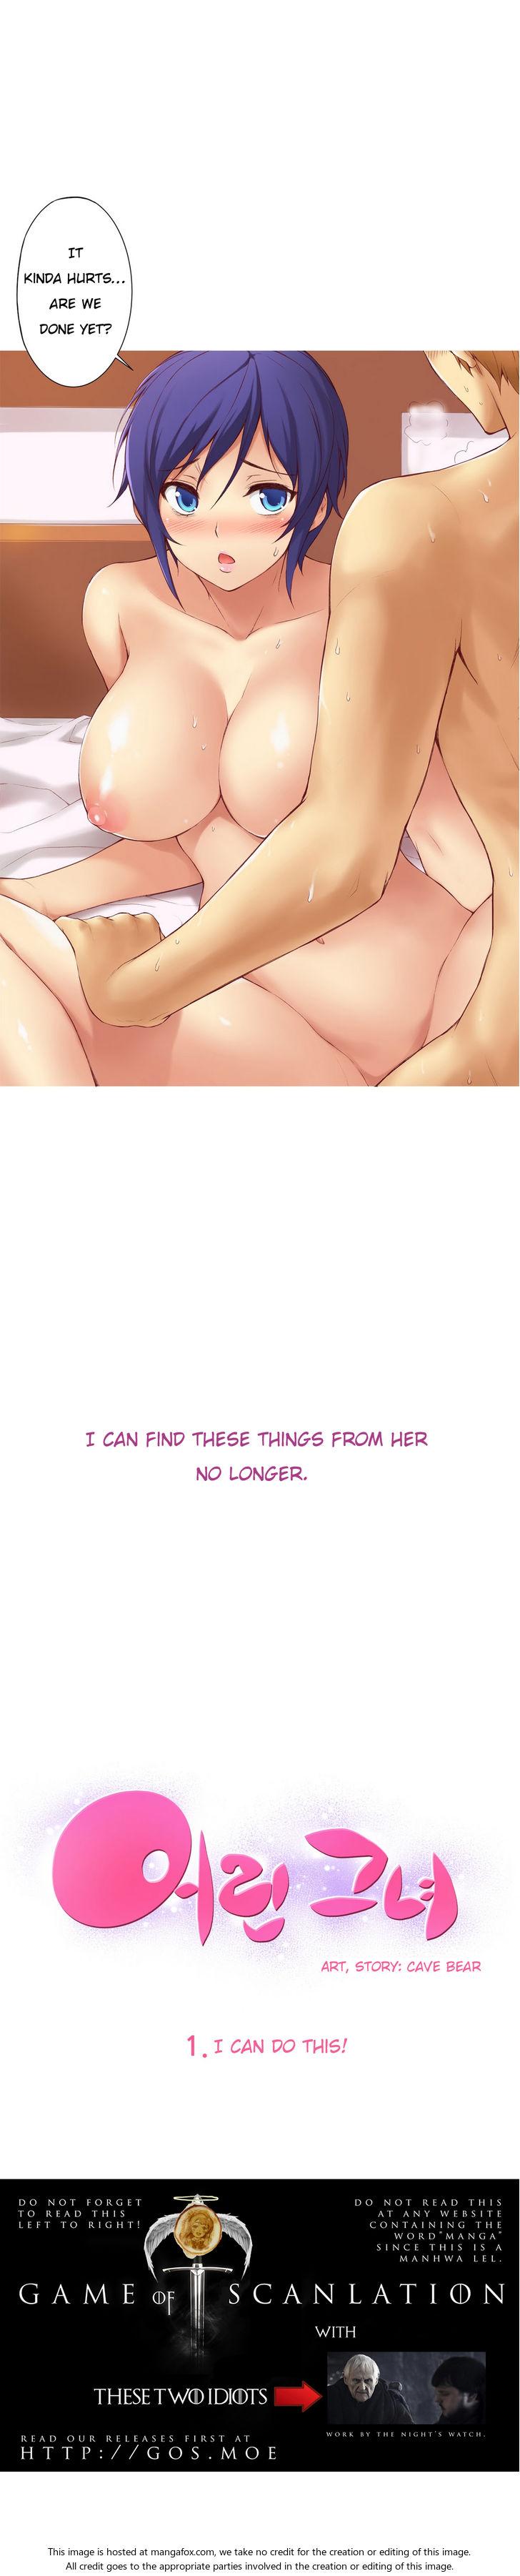 Rimjob [Donggul Gom] She is Young (English) Part 1/2 Wife - Page 6